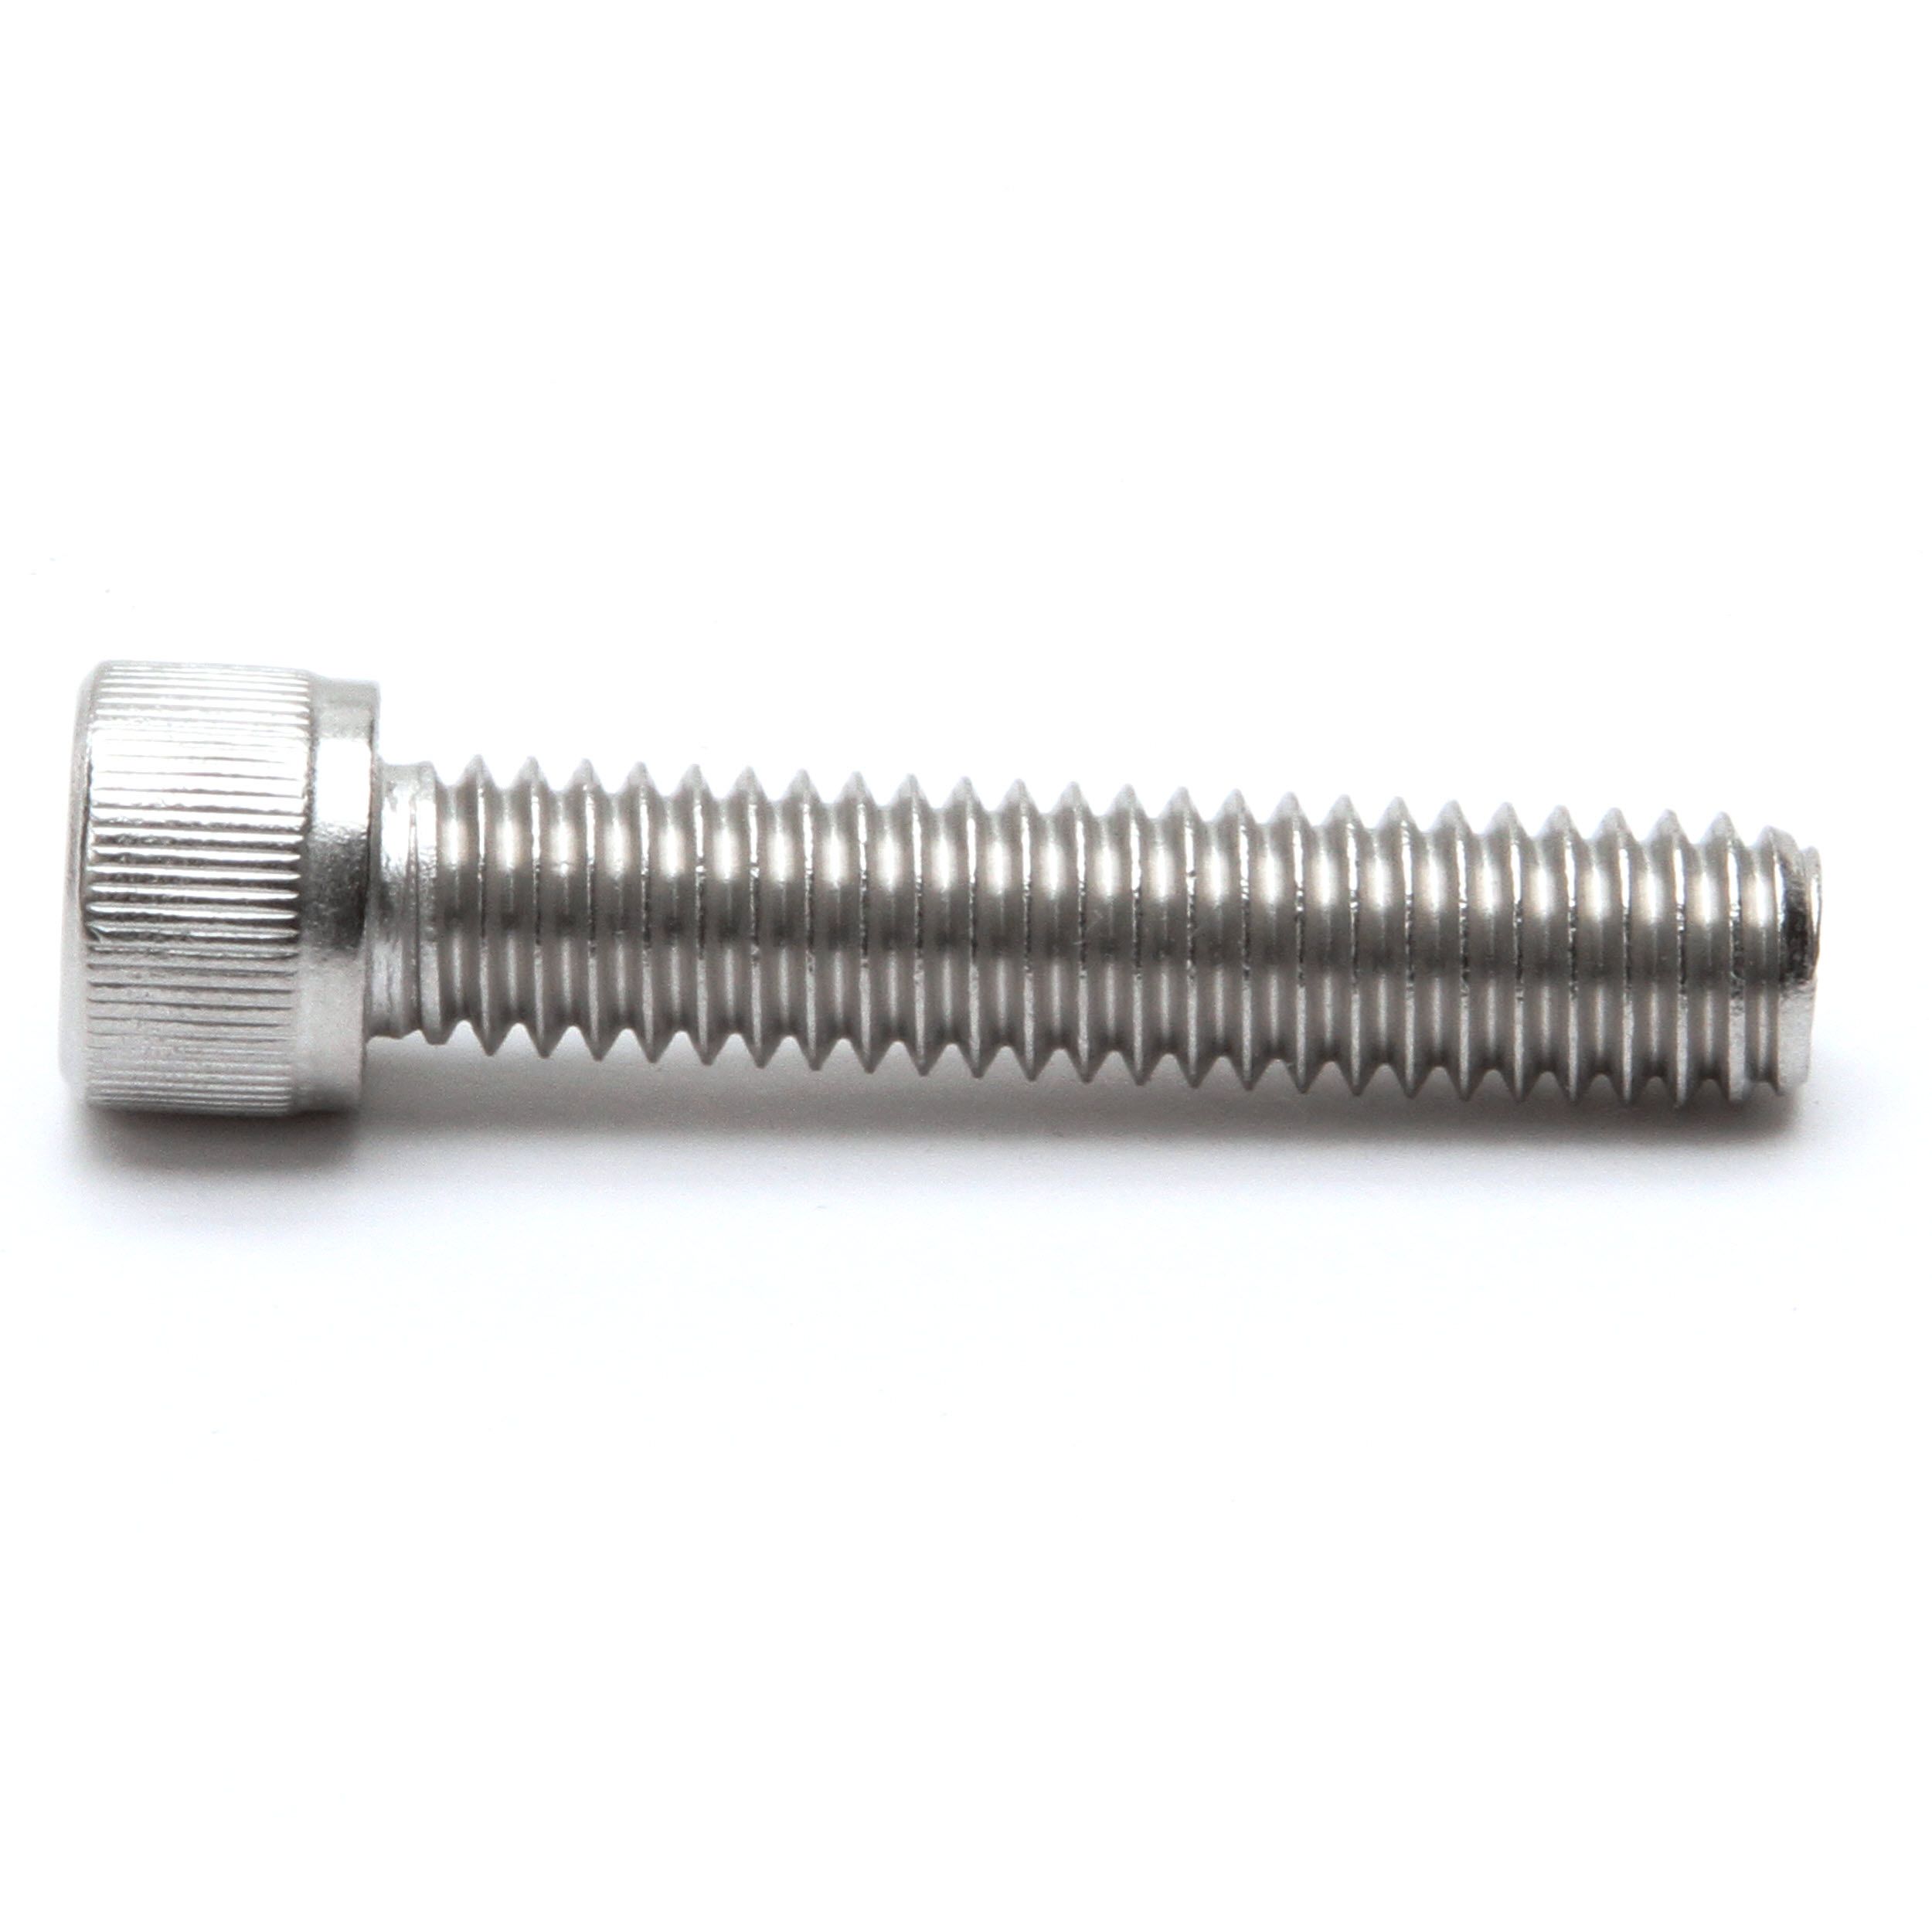 2-Pack The Hillman Group 943659 Chrome Smooth Socket Cap Screw 5/16-18 x 1-Inch